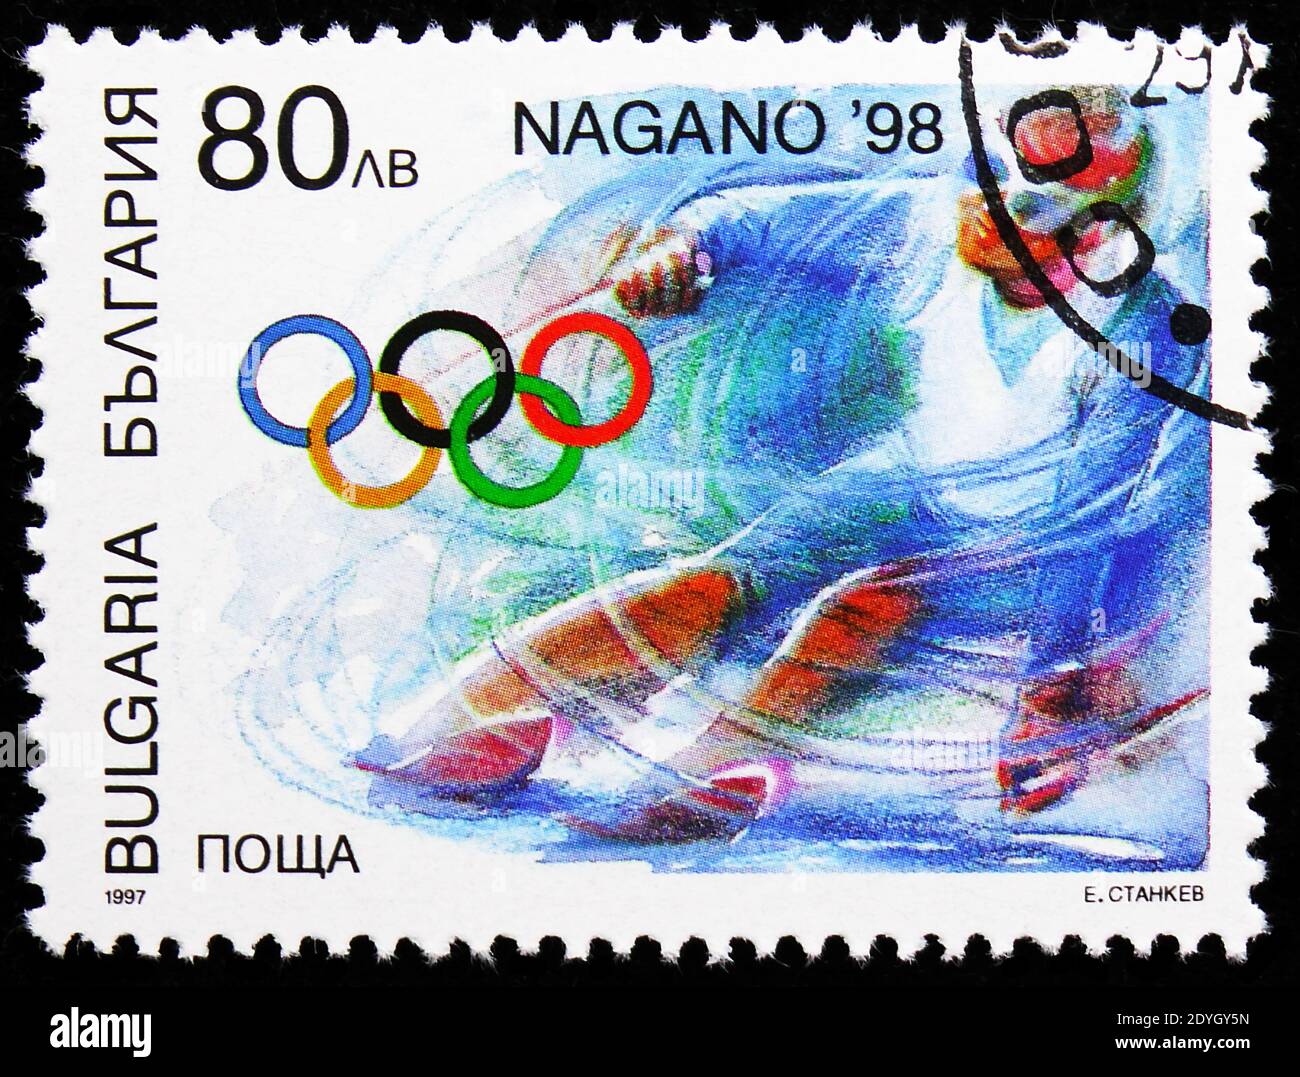 MOSCOW, RUSSIA - AUGUST 8, 2019: Postage stamp printed in Bulgaria shows Skiing, Winter Olympic Games 1998 - Nagano serie, circa 1997 Stock Photo